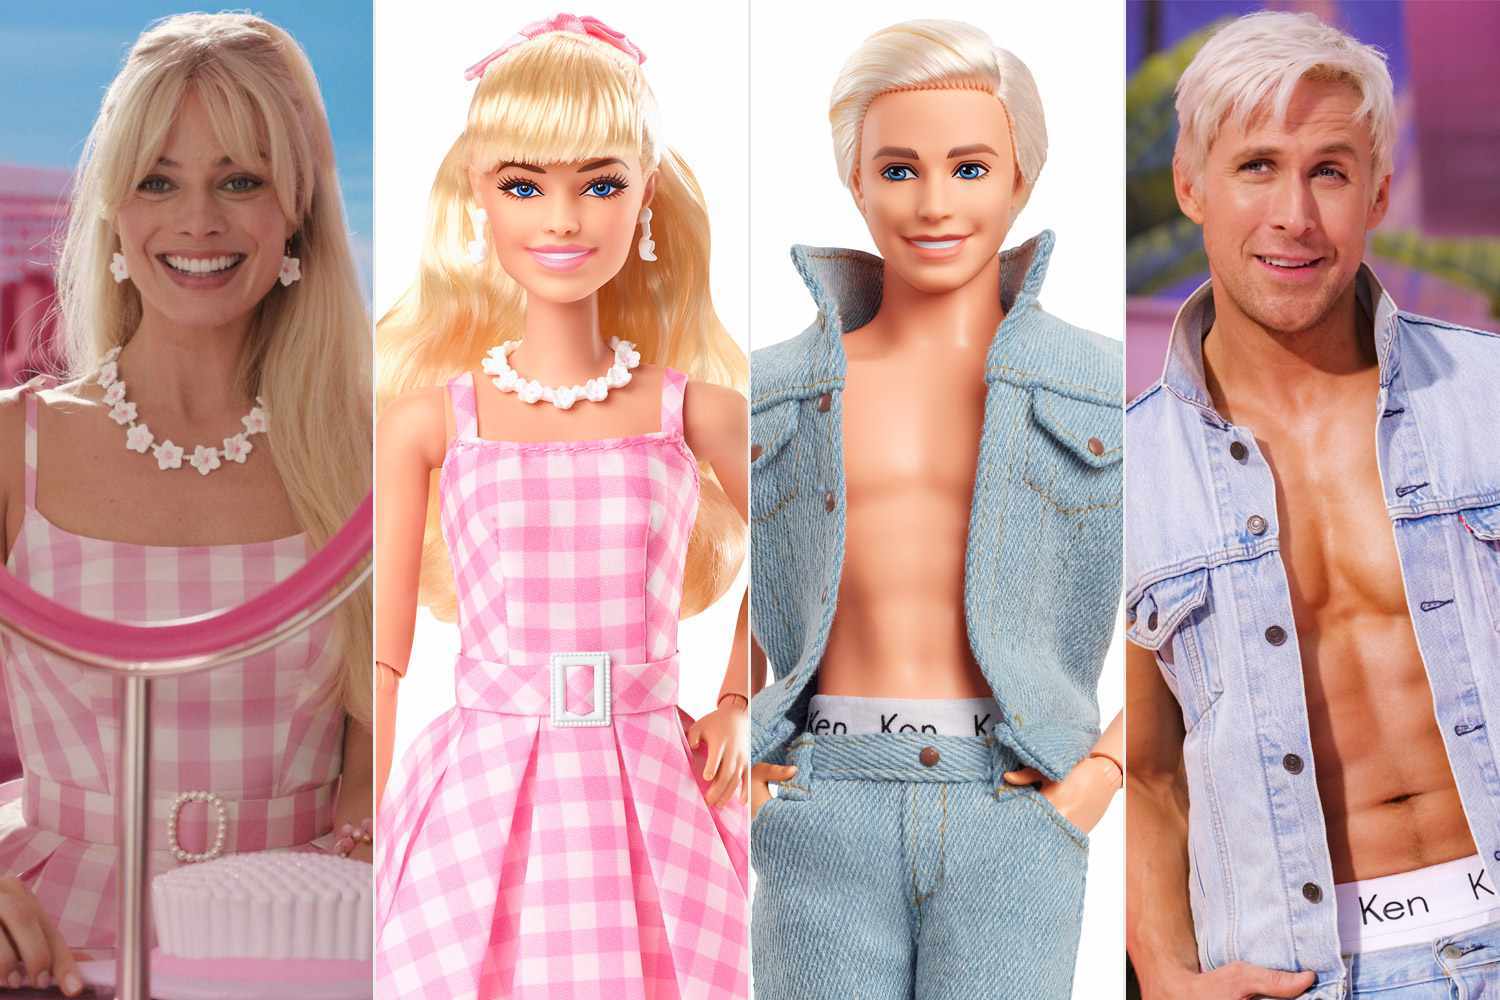 The unknown, dark story of the real Ken (Barbie)